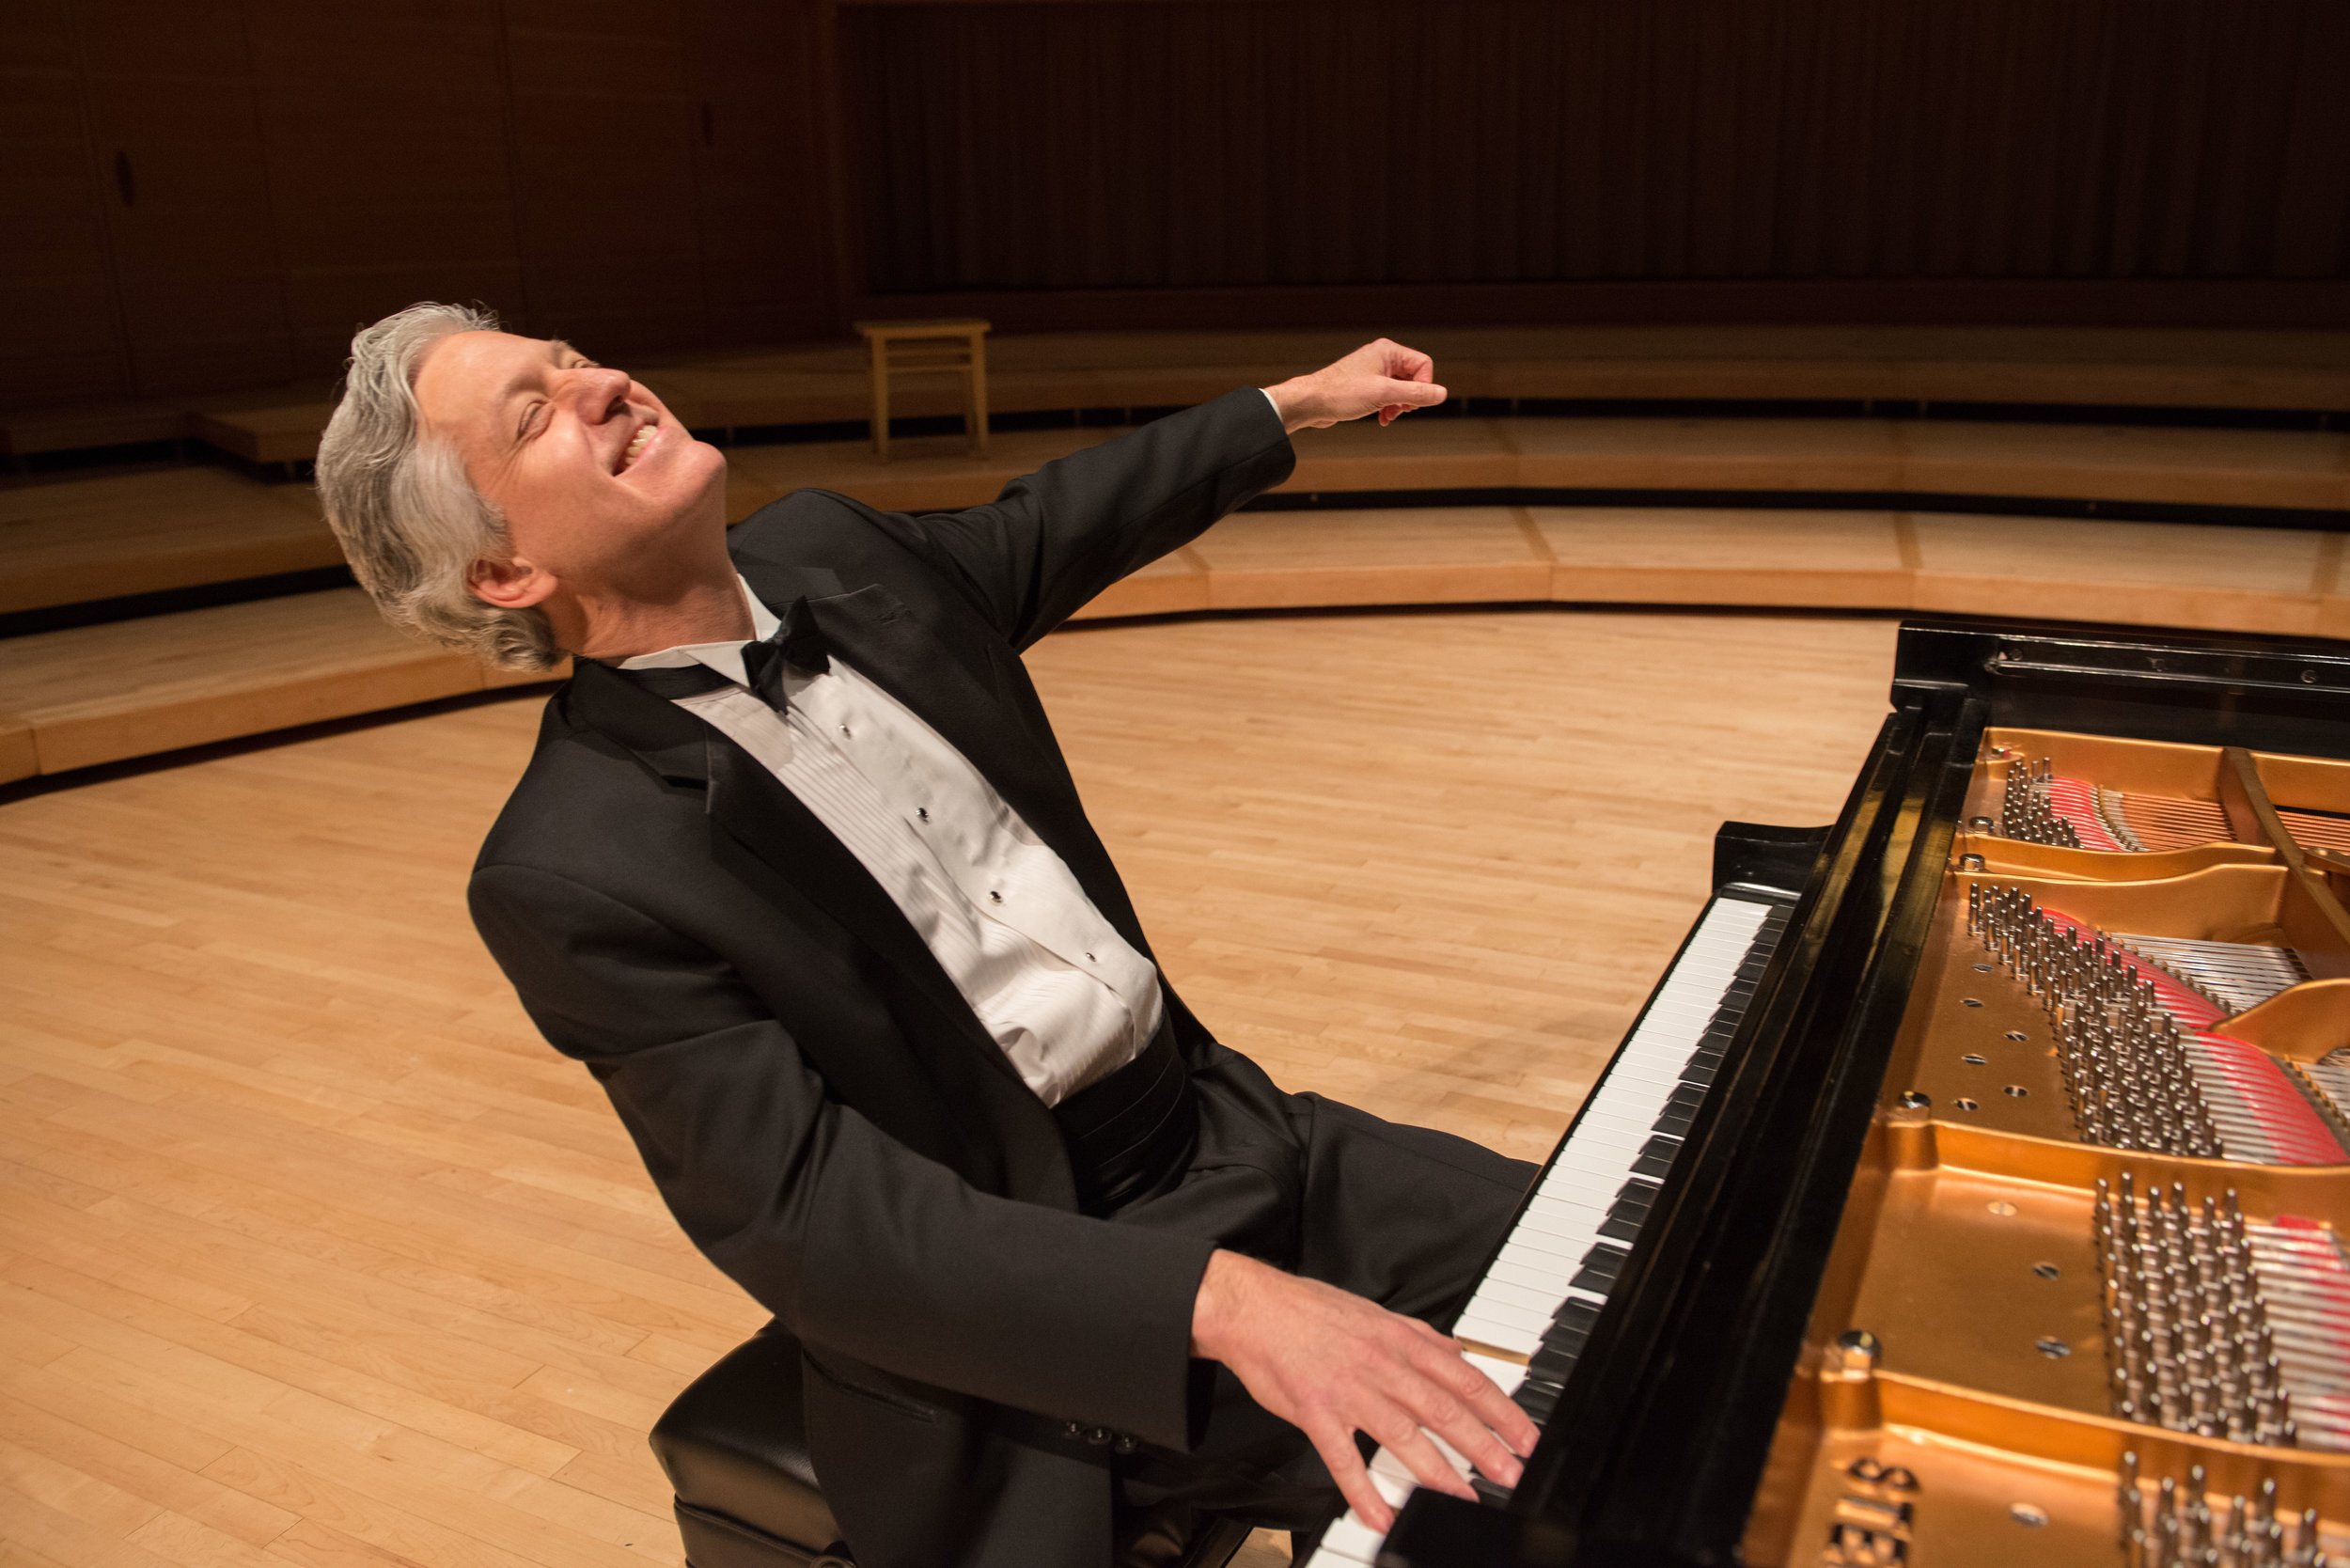 Brian performs at the 2018 Chopin concert at Strathmore.